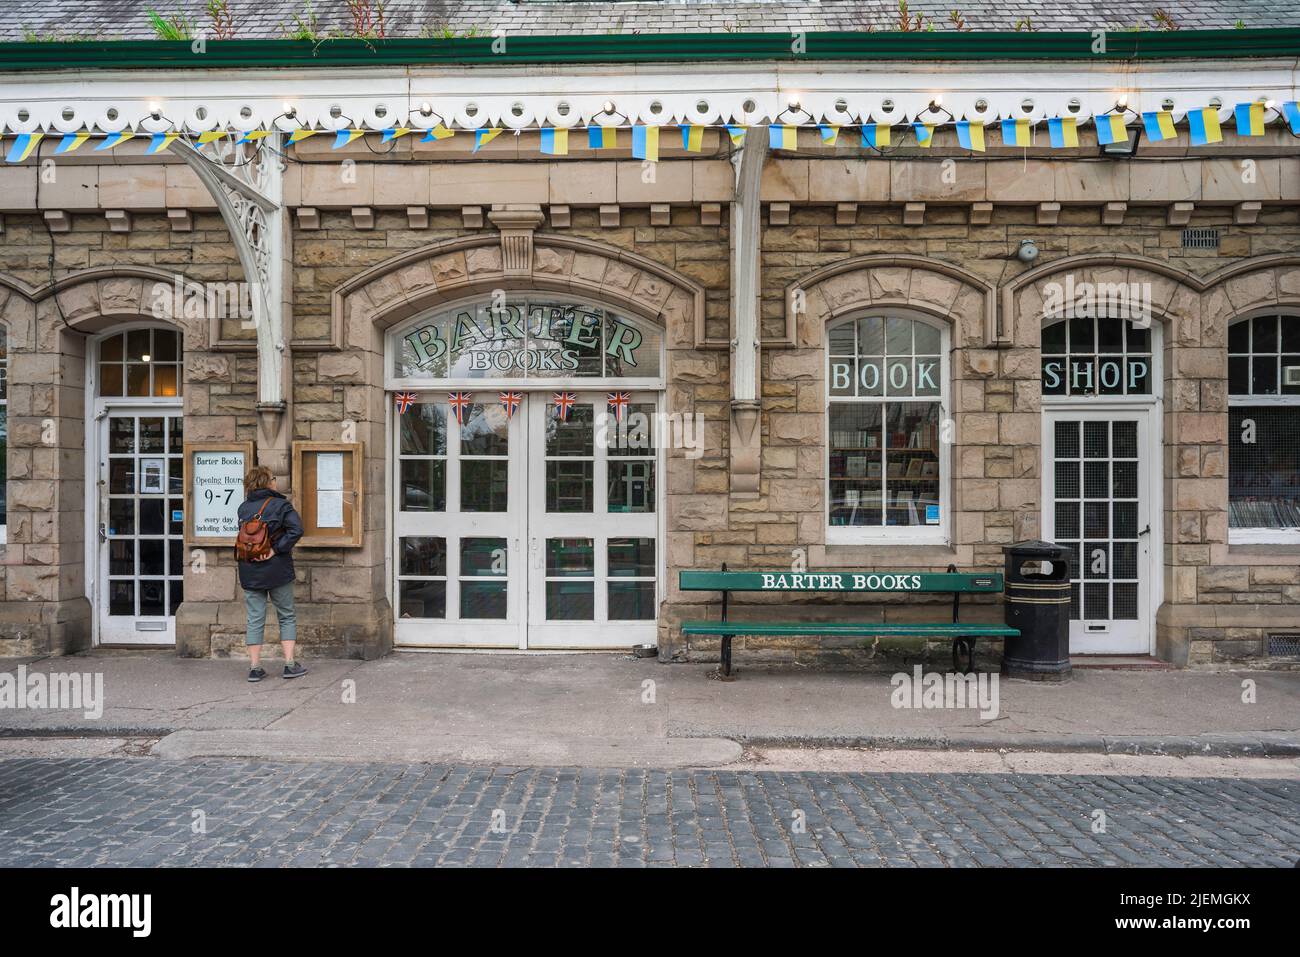 Barter Books Alnwick, exterior view of Barter Books, a famous  second hand book shop sited in a converted train station in Alnwick, Northumberland UK Stock Photo